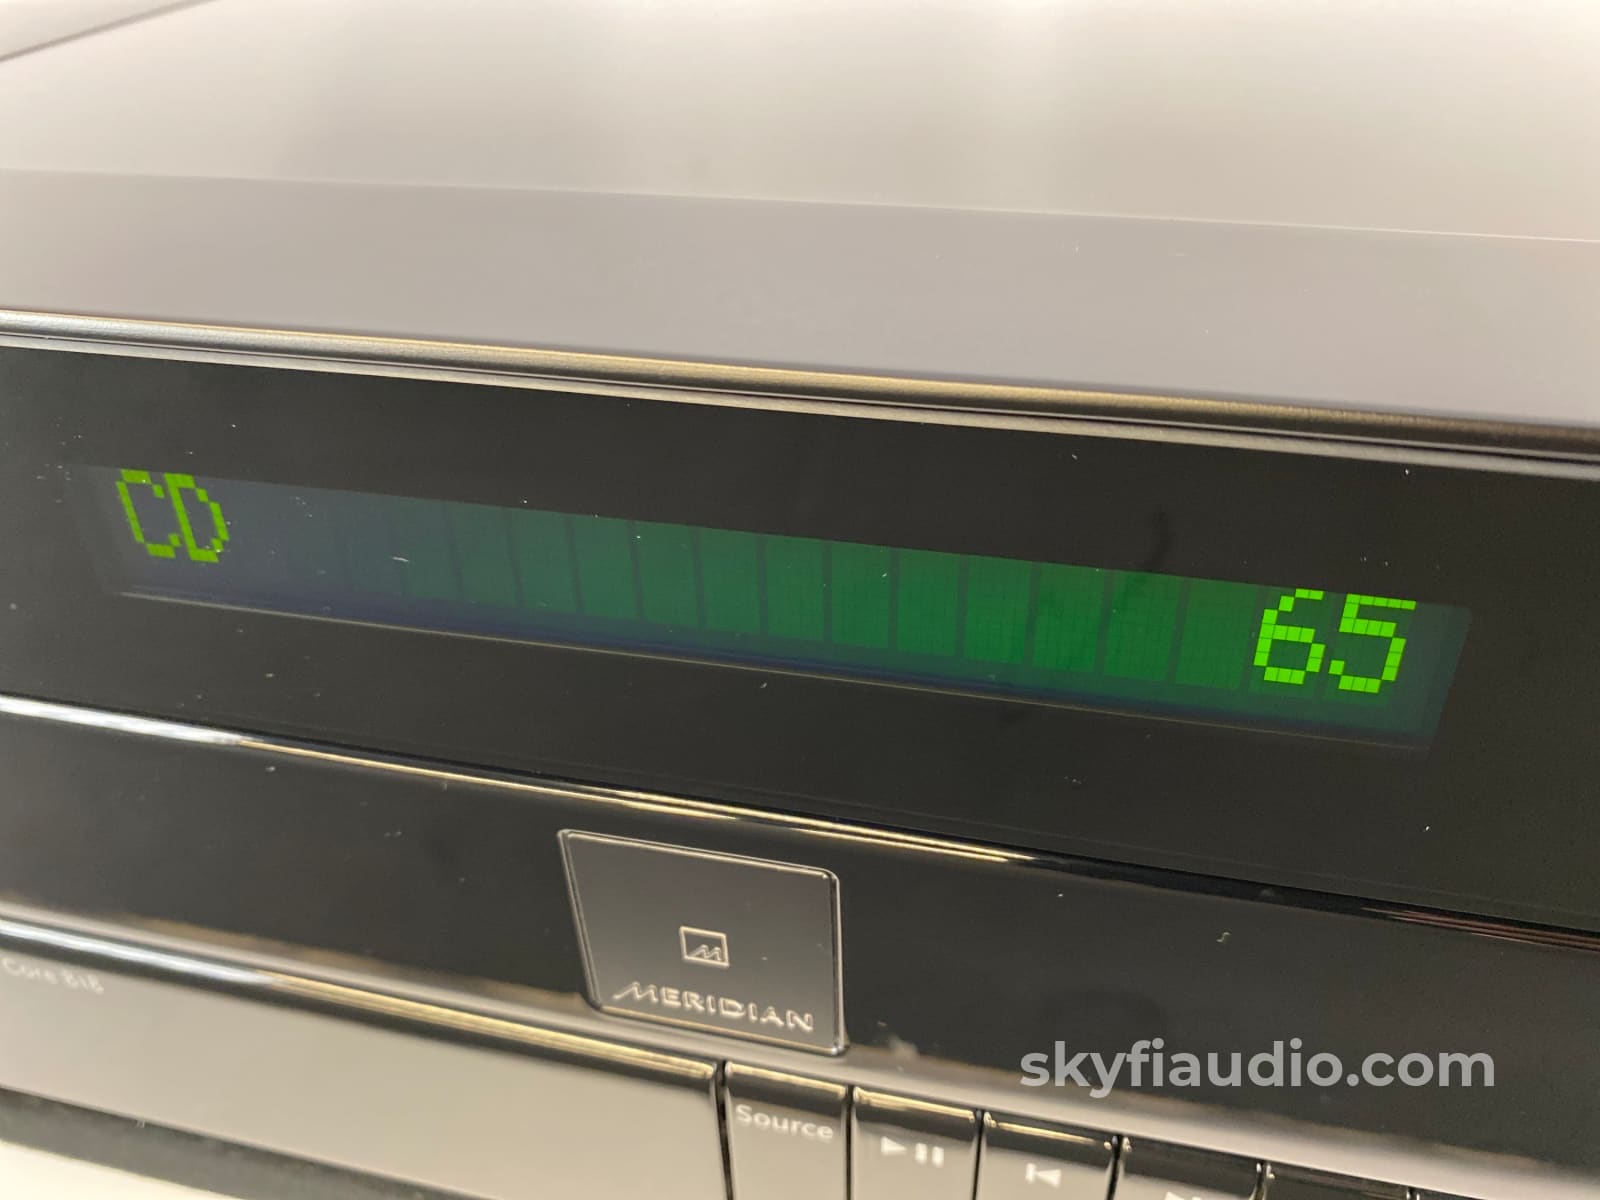 Meridian Reference Audio Core 818V3 - With Mqa Hi-Res Preamplifier